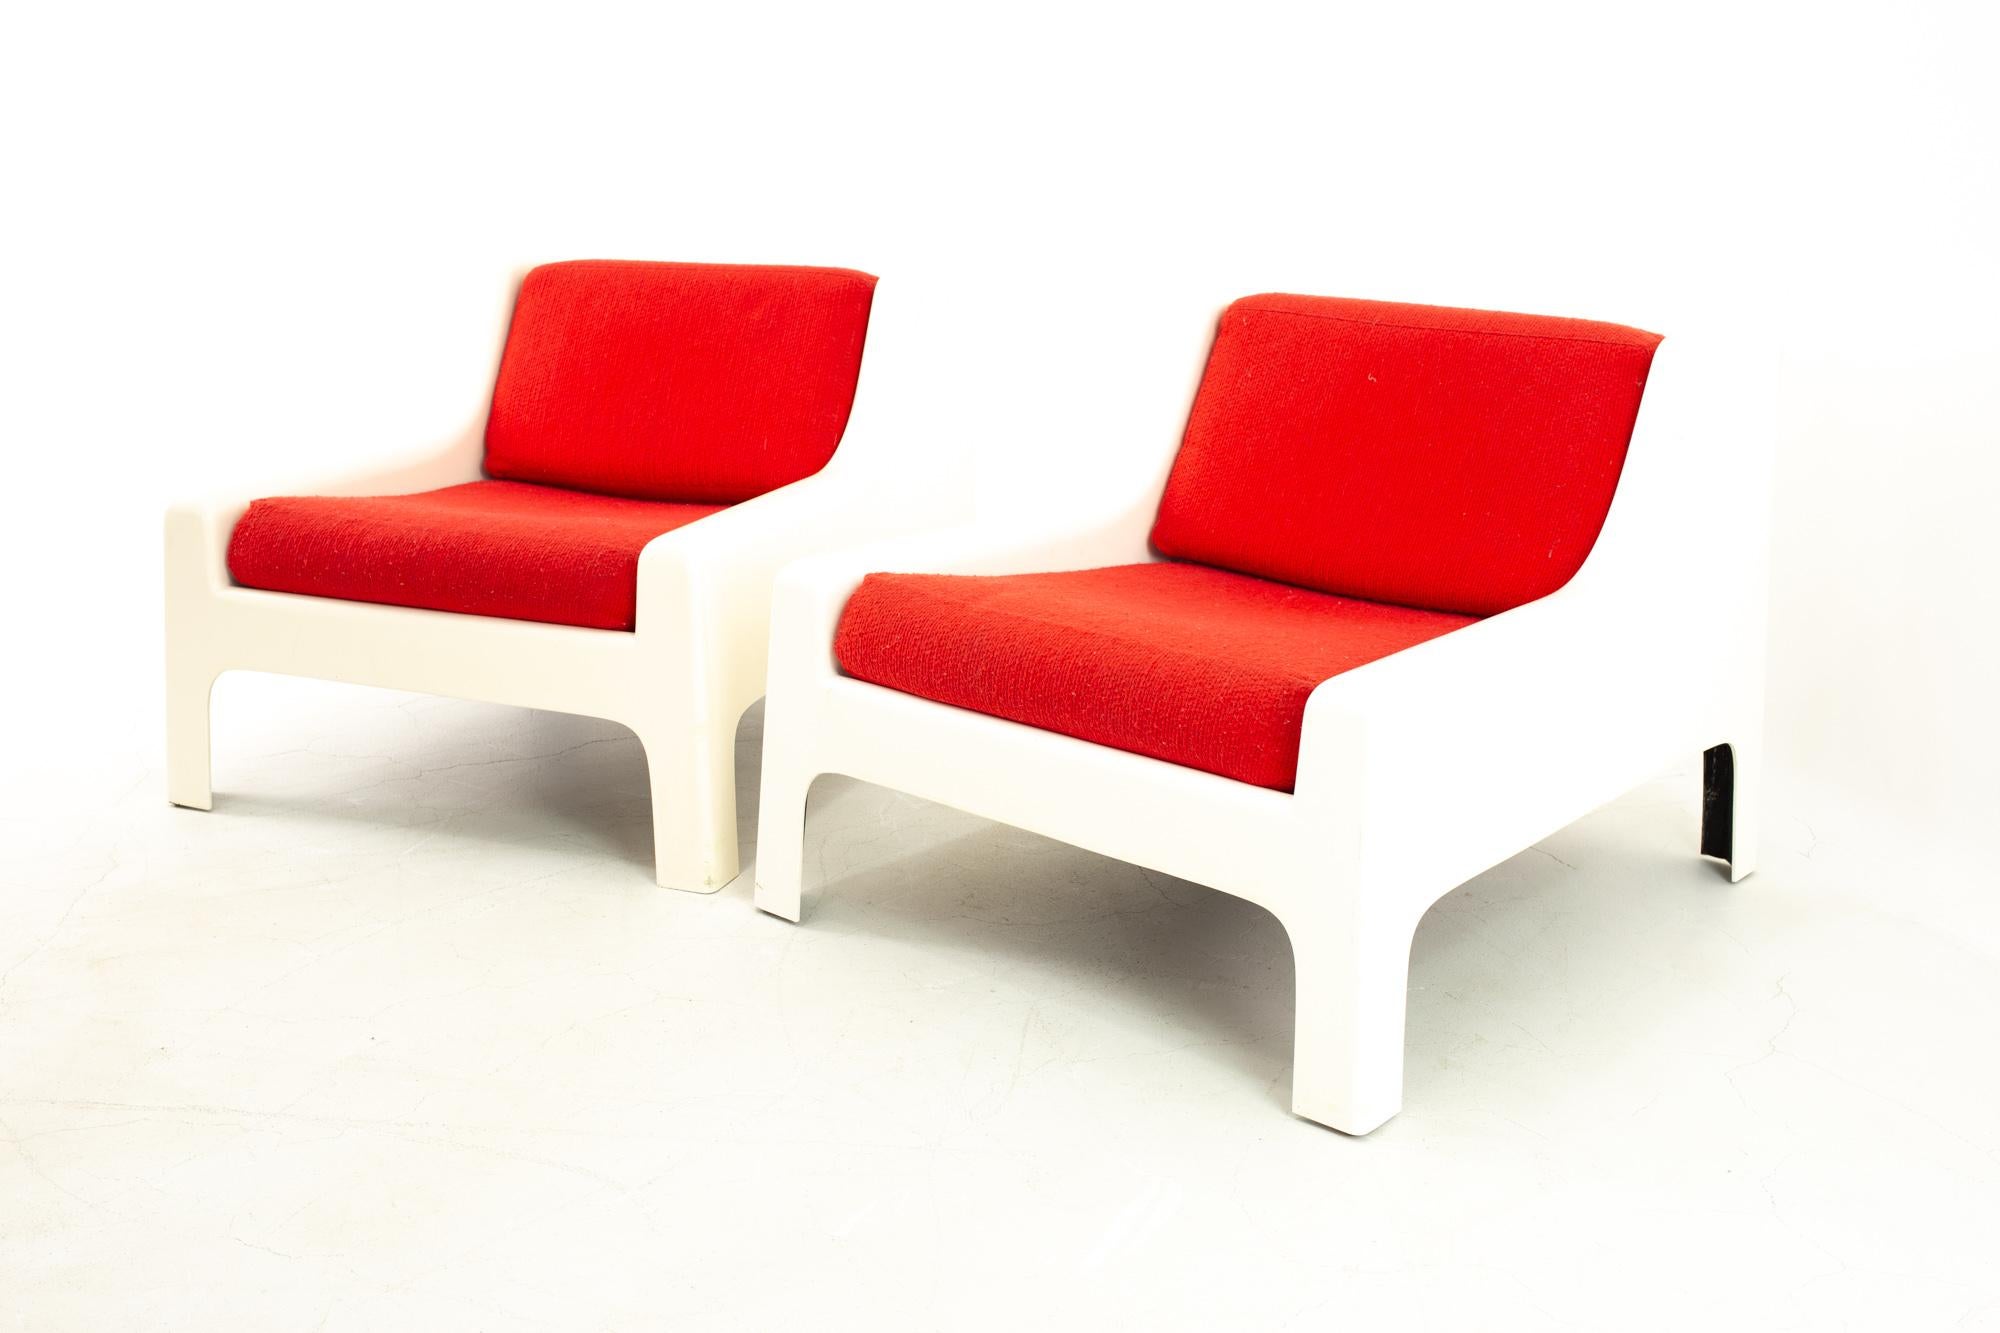 Moretti Mid Century fiberglass lounge chairs - pair
Each chair measures: 31 wide x 35.25 deep x 25.5 high, with a seat height of 15.5 and arm height of 16 inches

Each piece of furniture is available in what we call restored vintage condition. Upon